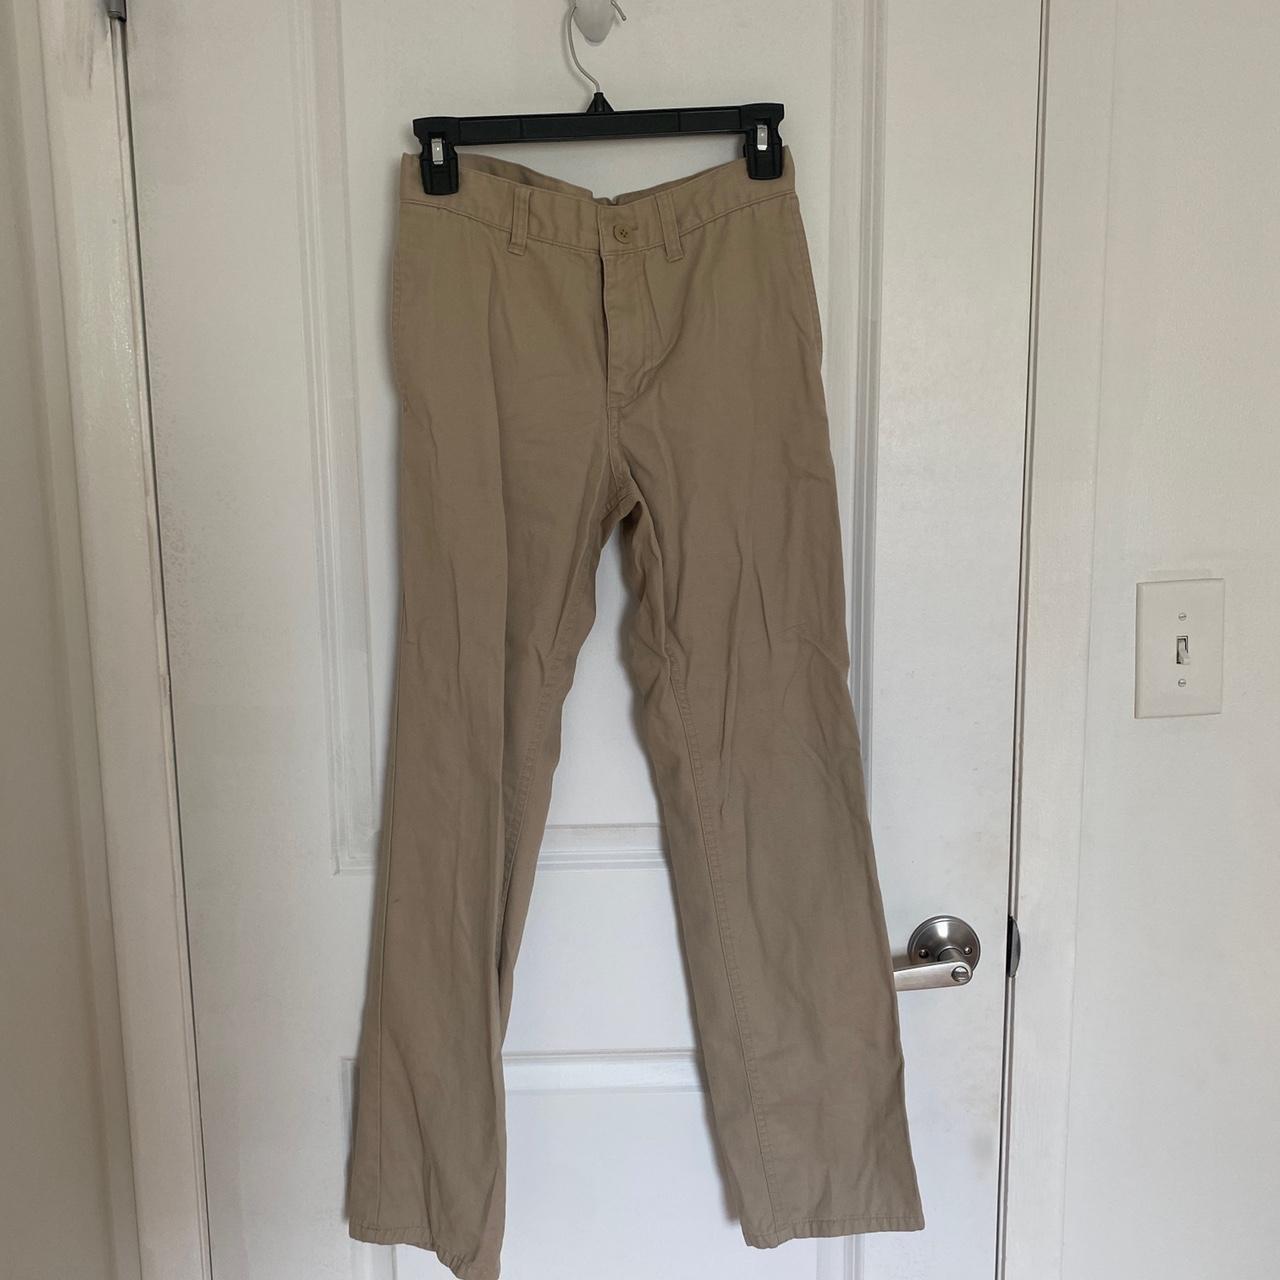 Old Navy Baby Boys Pants robin blue Khakis Size 69 Months easter pastel  cotton  eBay